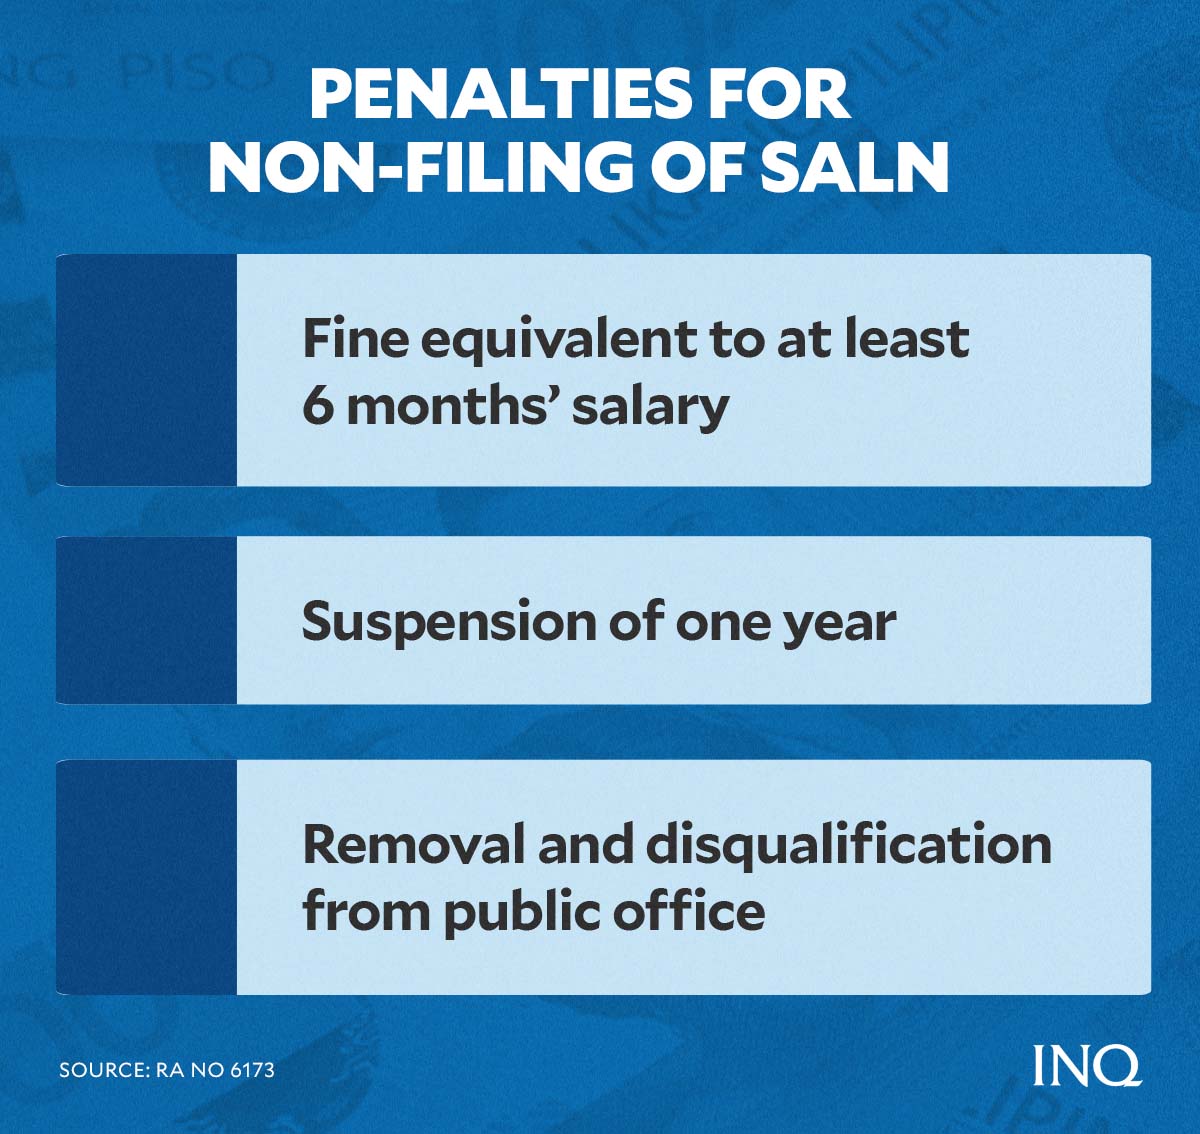 penalties for non-filing of SALN